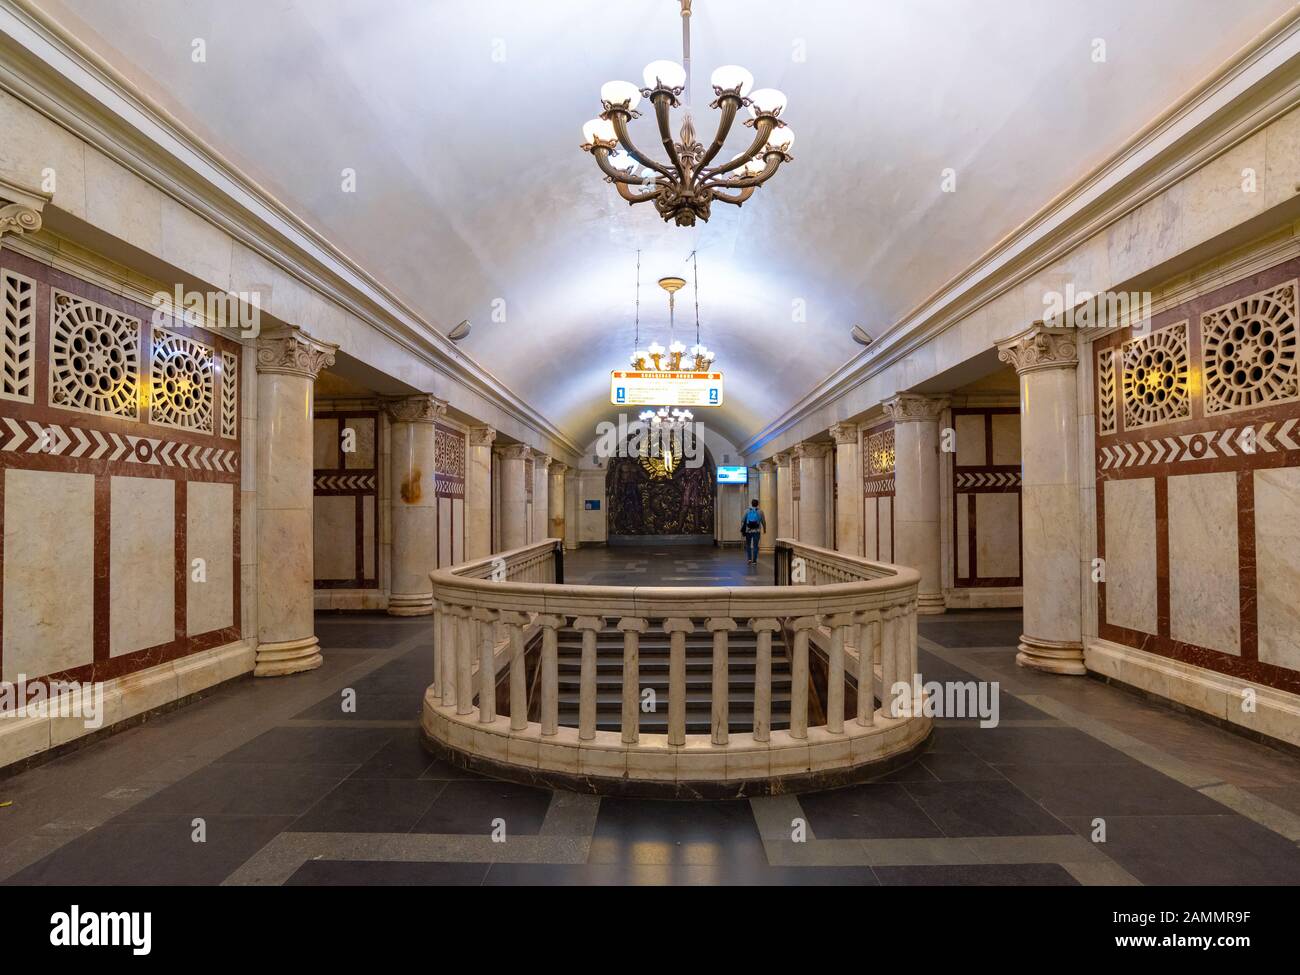 Moscow, Russia-APR8,2018 : Interior view of metro station on April8,2018 in Moscow, Russia. Moscow metro stations is a rapid transit system serving ha Stock Photo